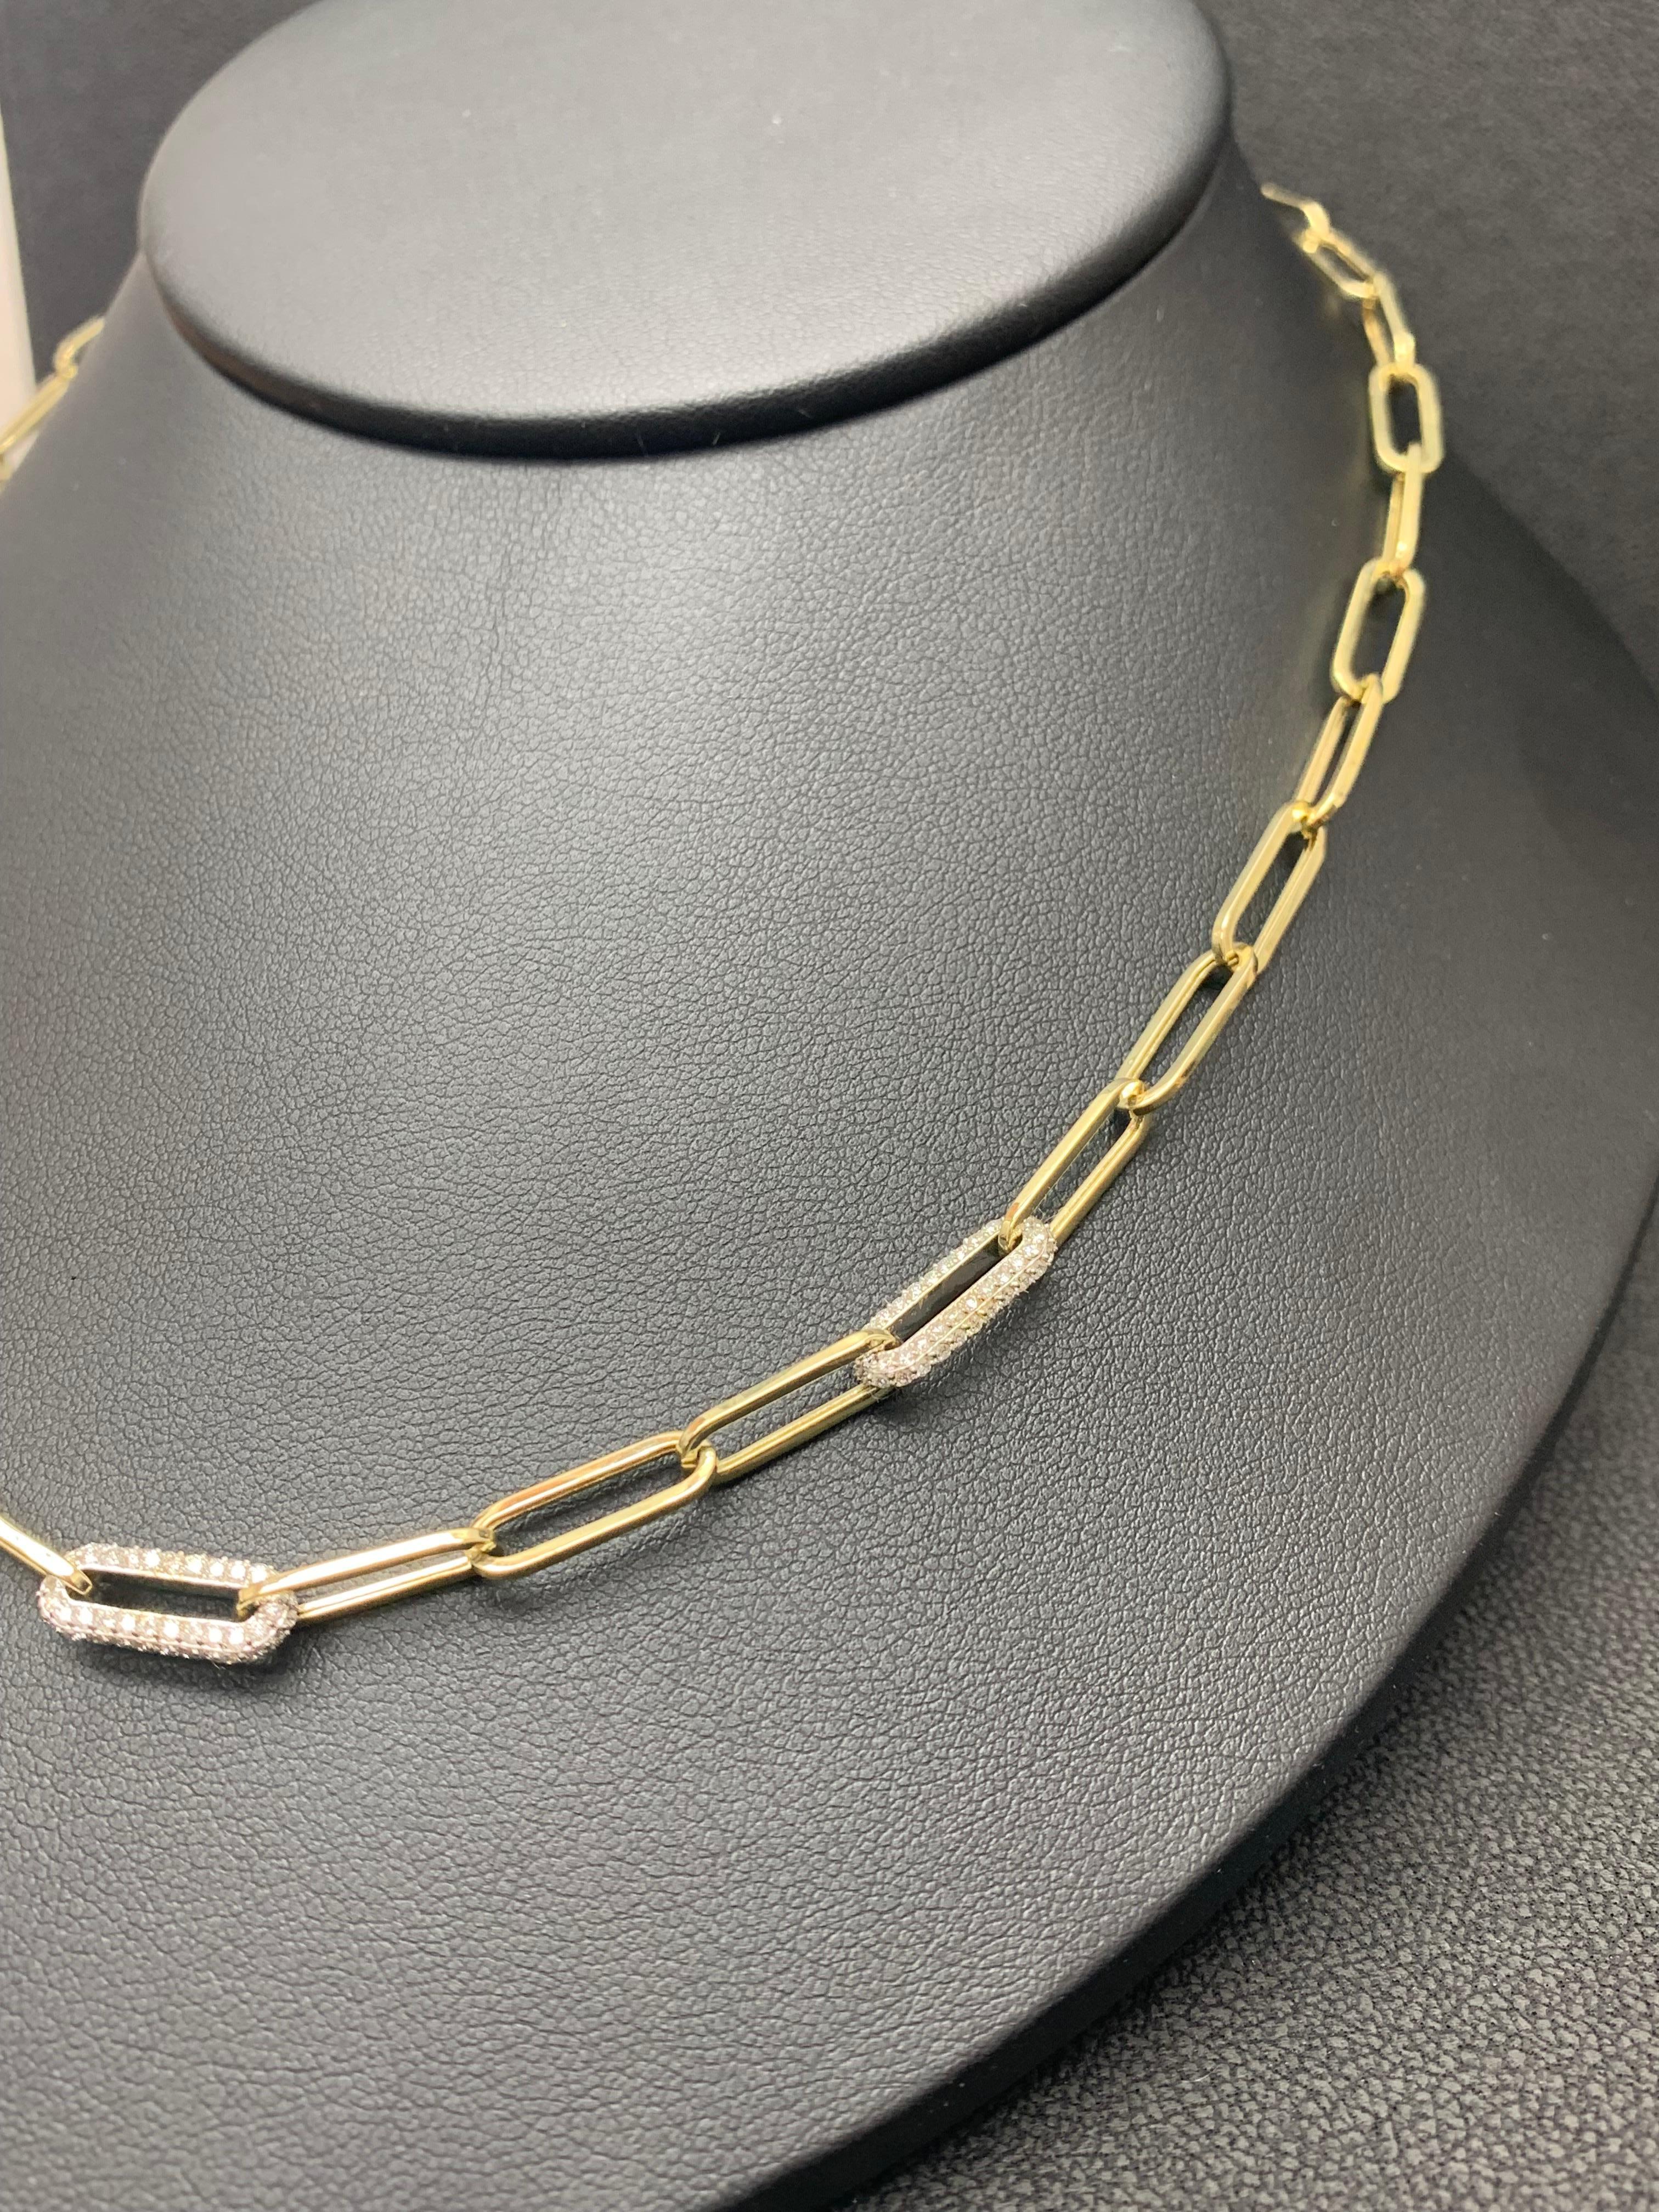 what is the clip part of a necklace called